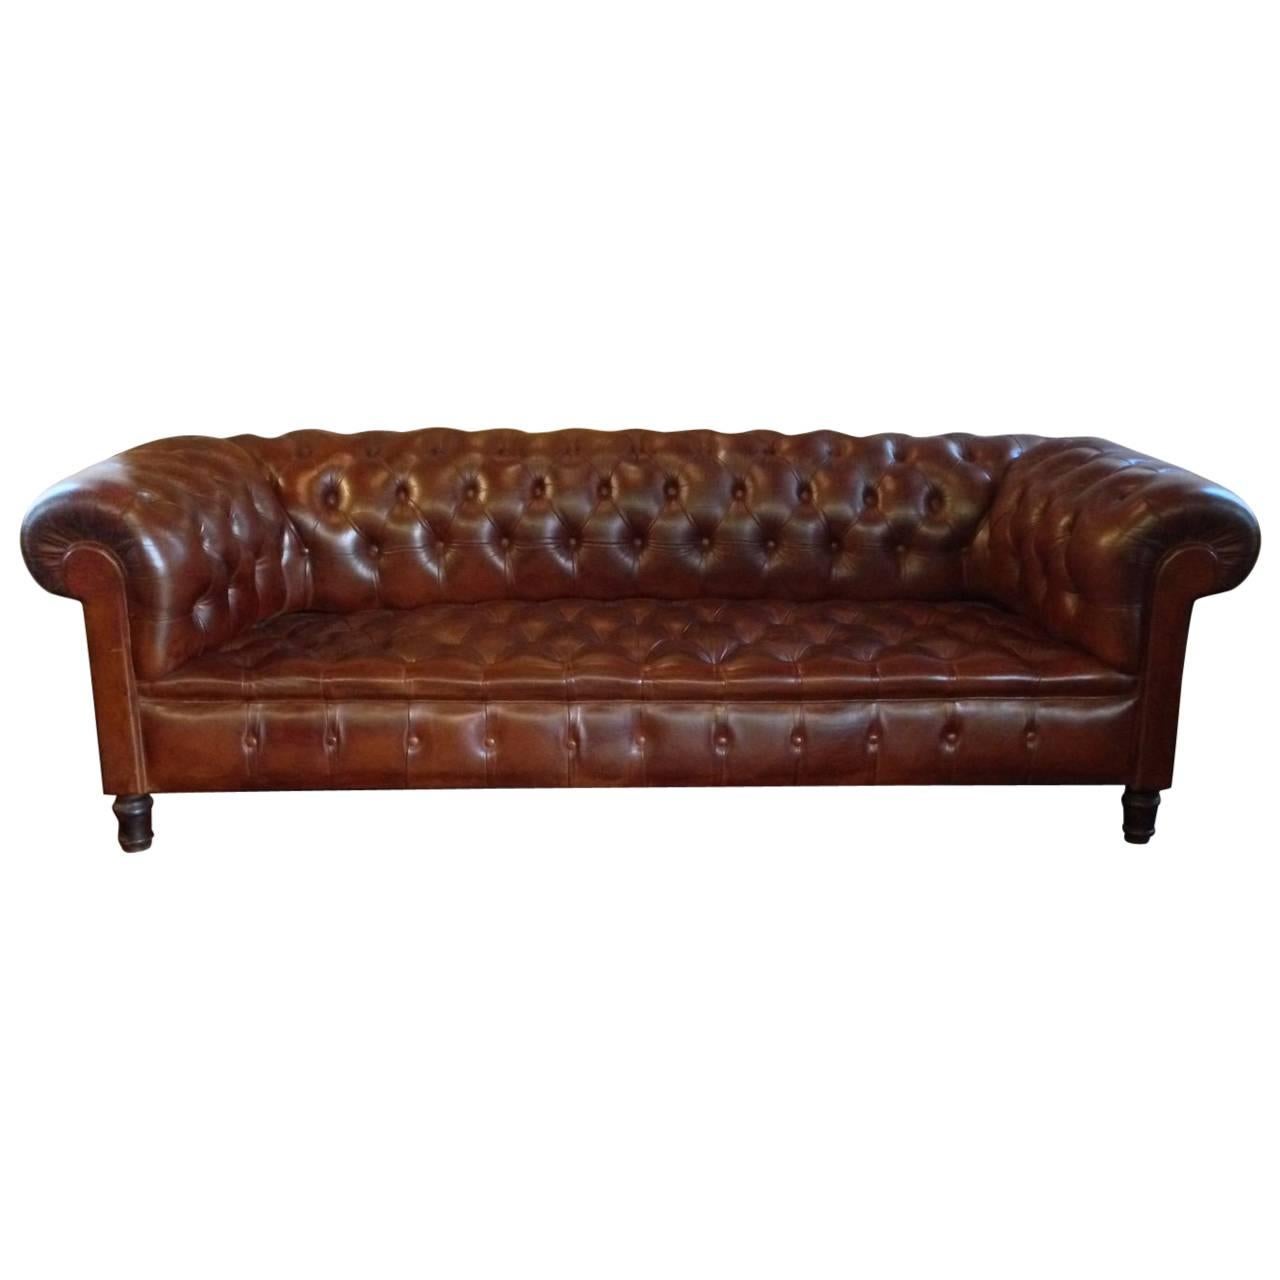 20th Century Chesterfield Sofa For Sale